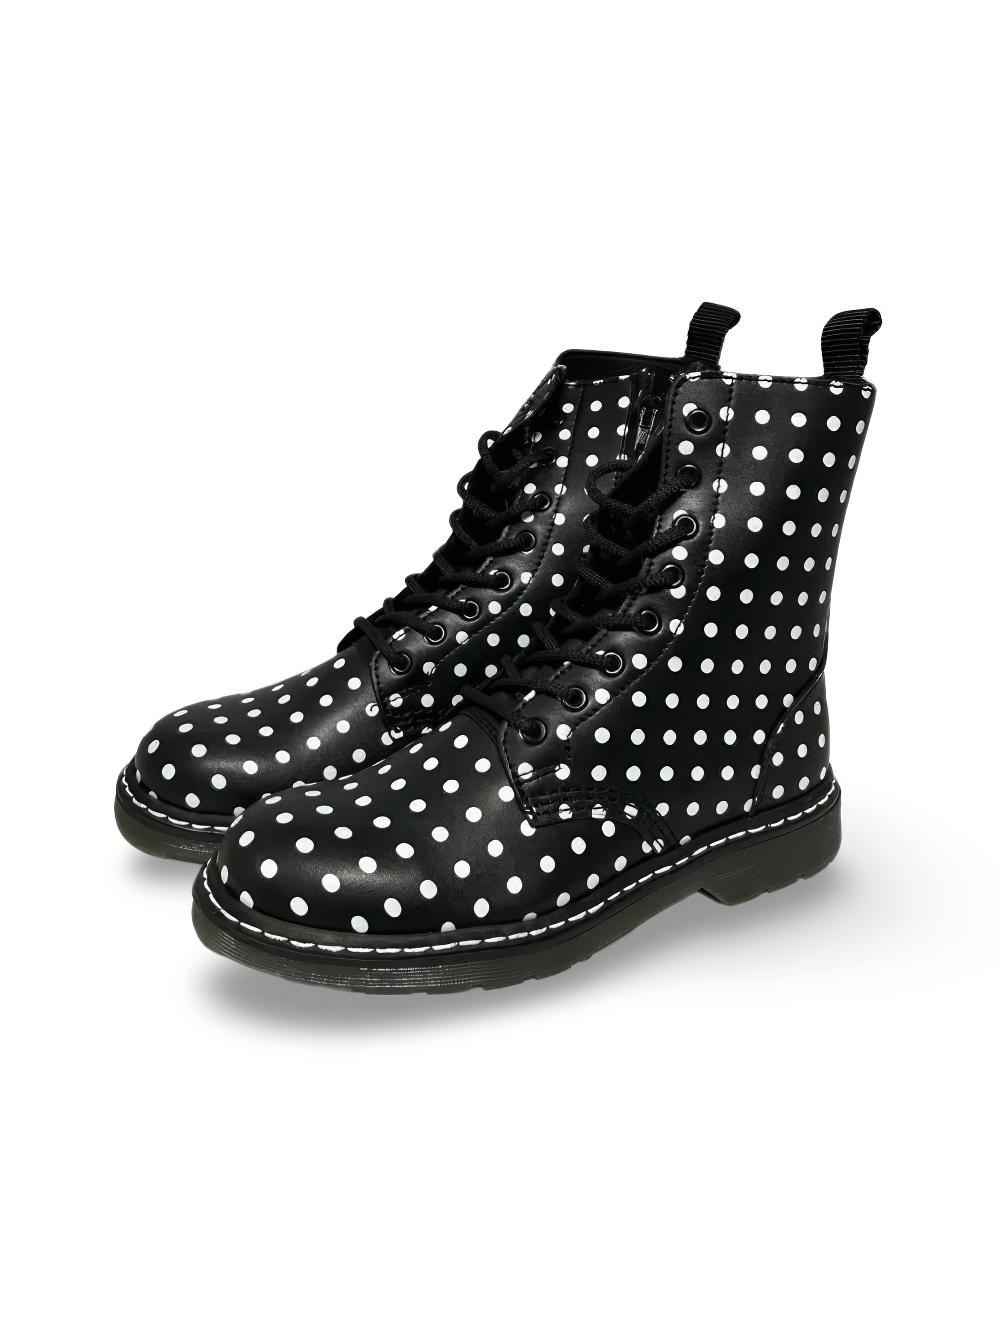 Women's Black Leather Ankle Boots in White Polka Dot